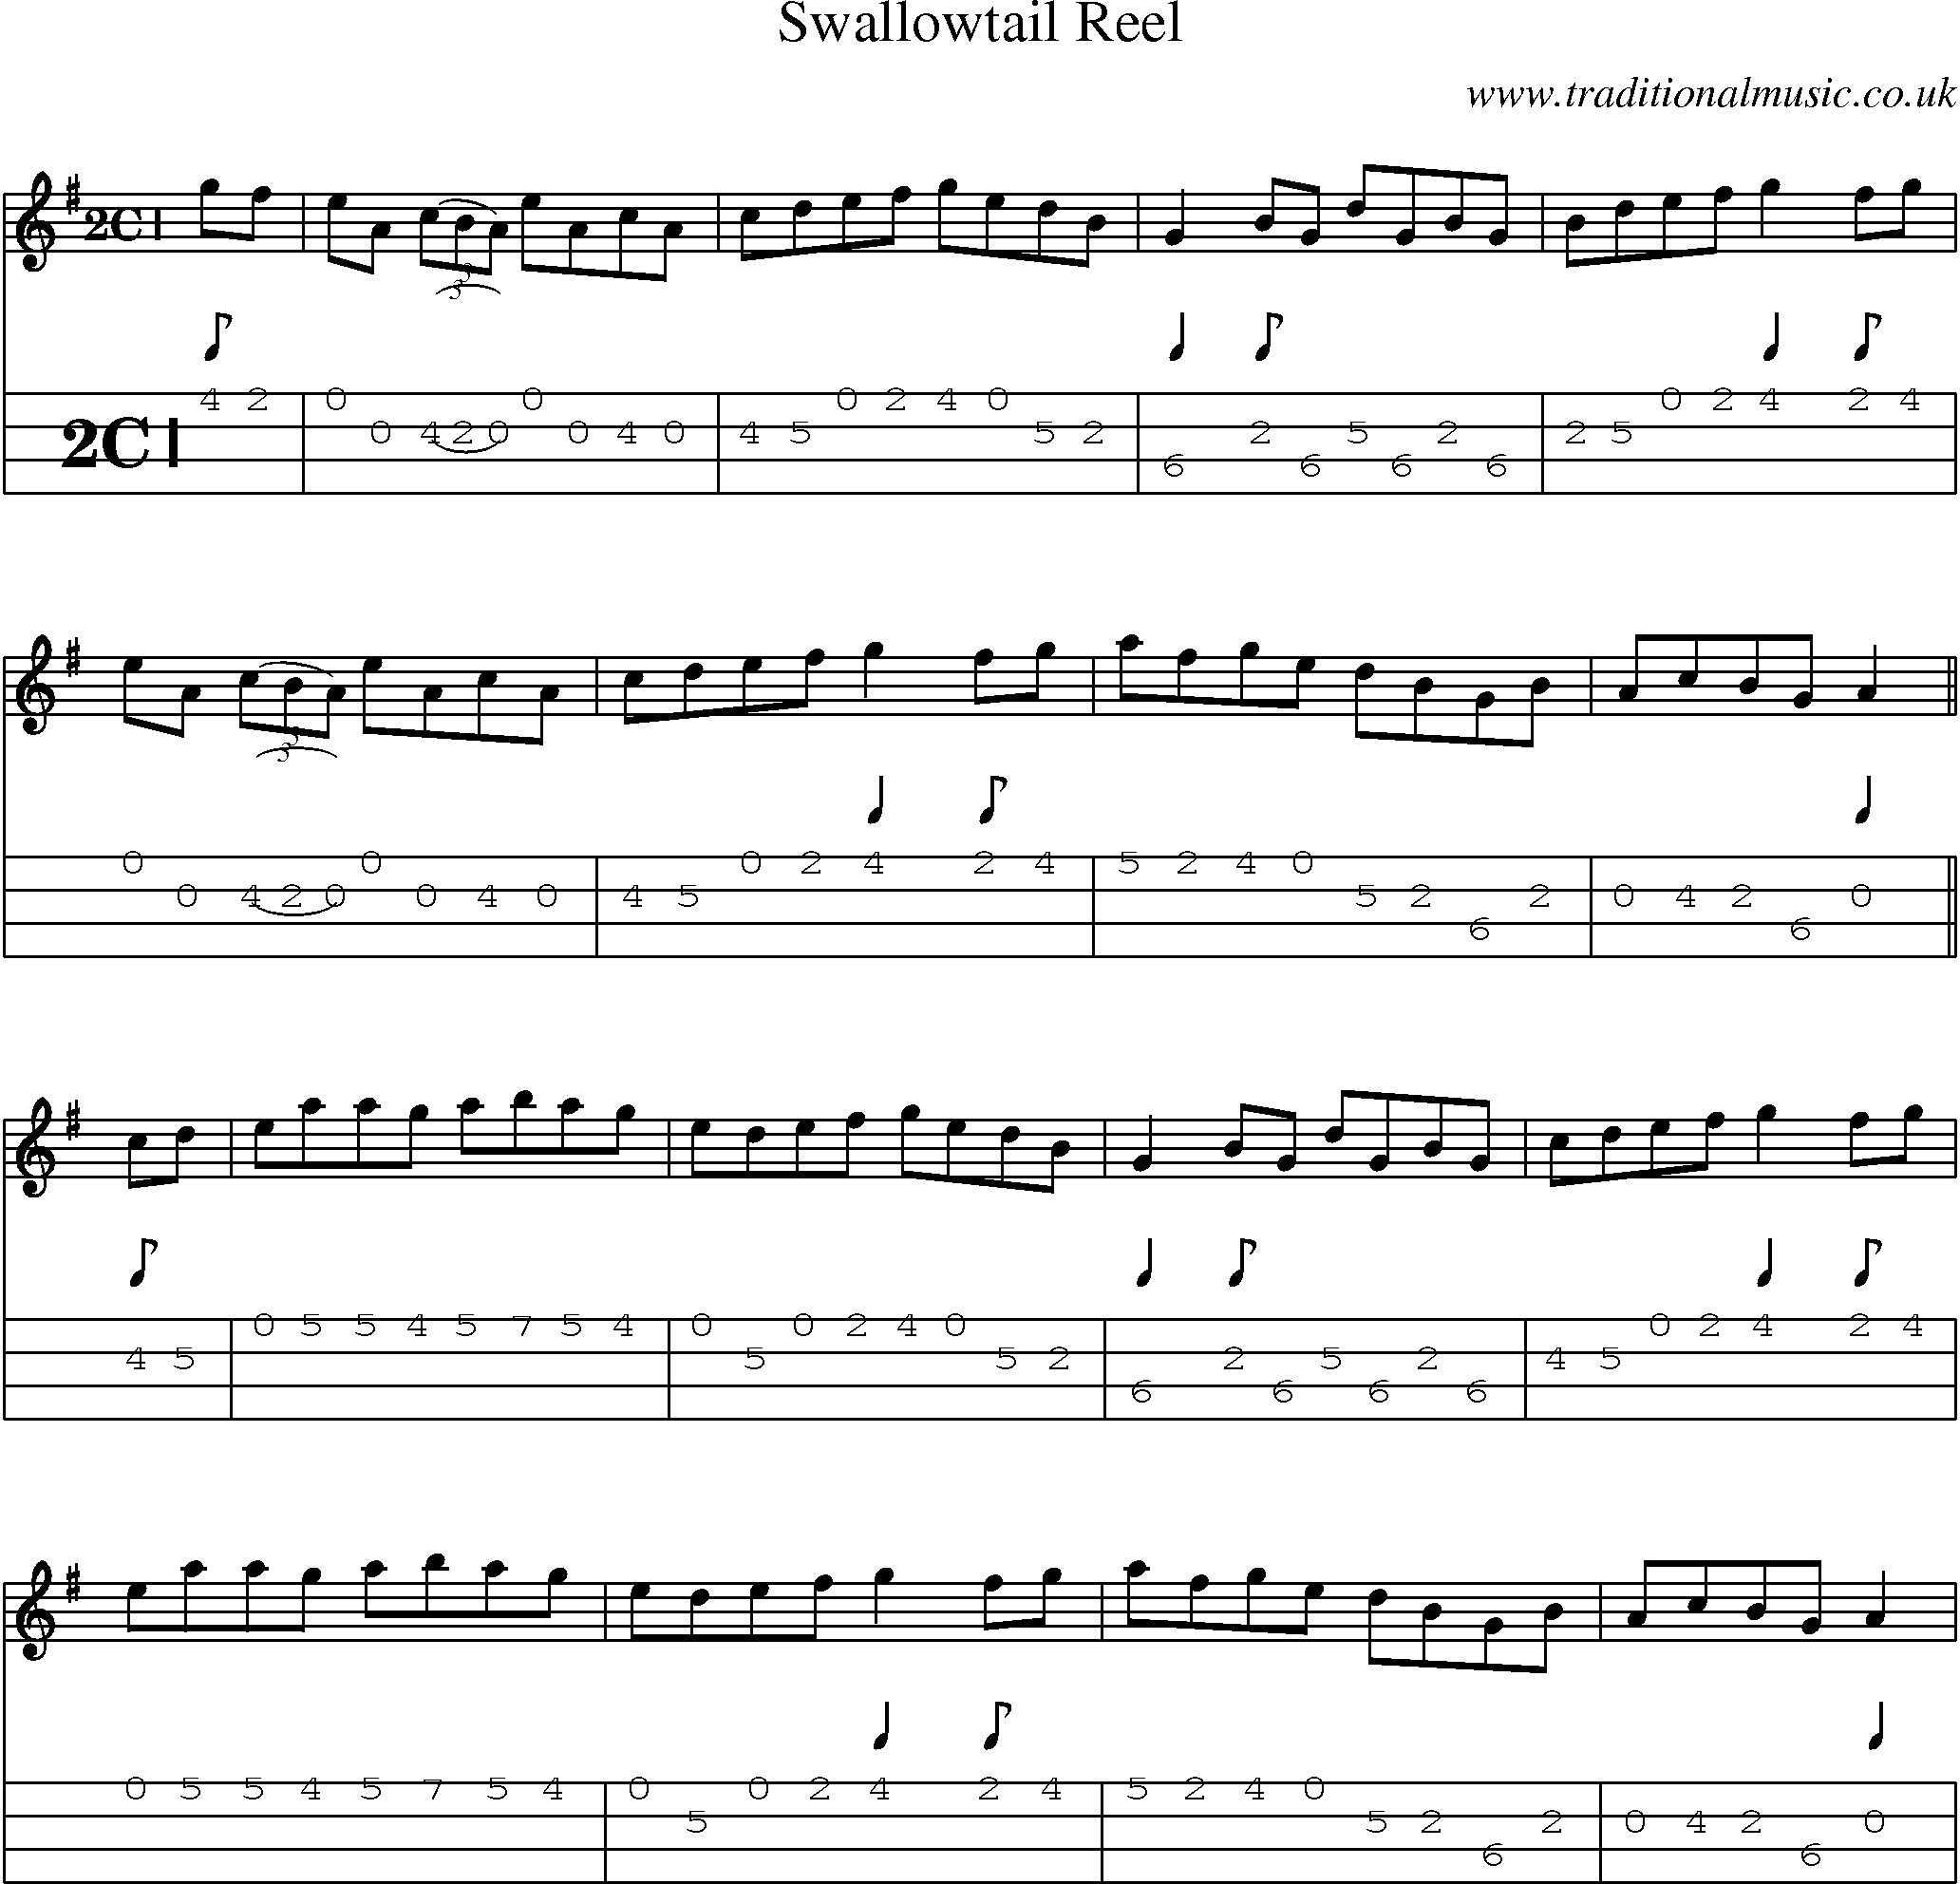 Music Score and Mandolin Tabs for Swallowtail Reel